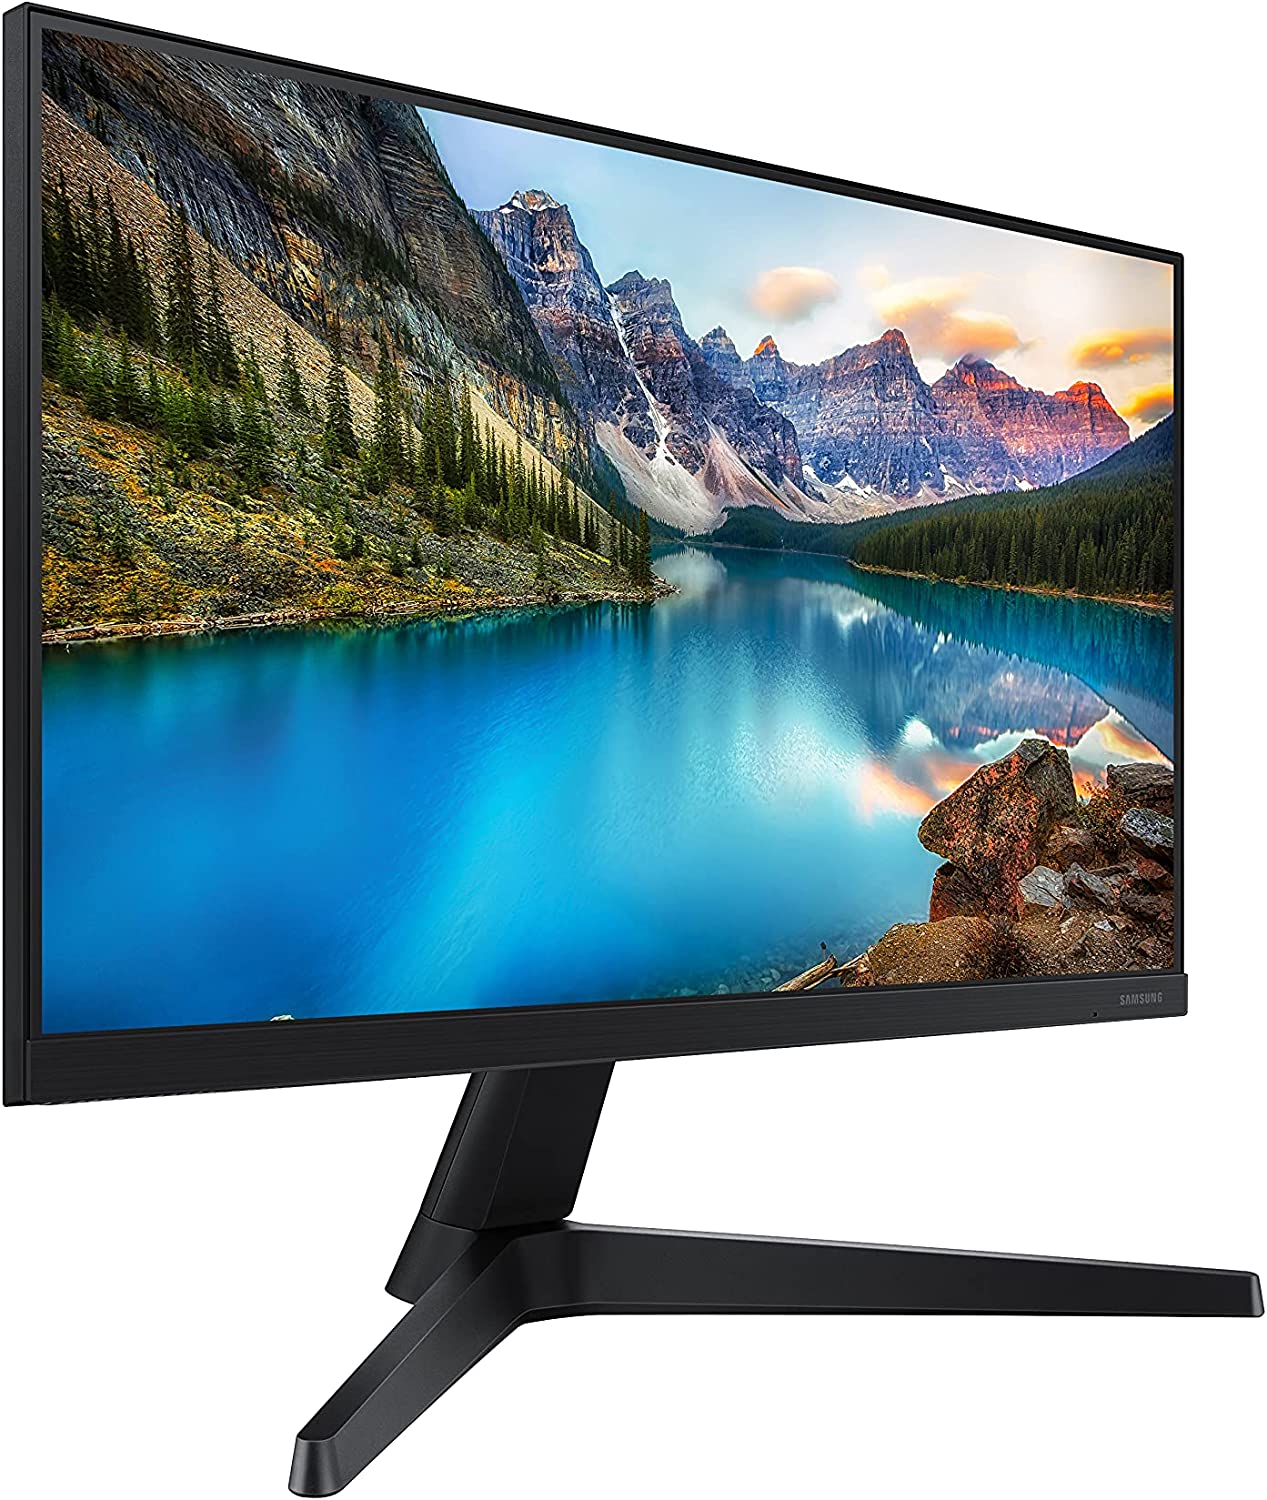 Samsung LF22T374FWNXGO 22" T37F Series 1920 x 1080 60Hz FHD Monitor for Business - Certified Refurbished